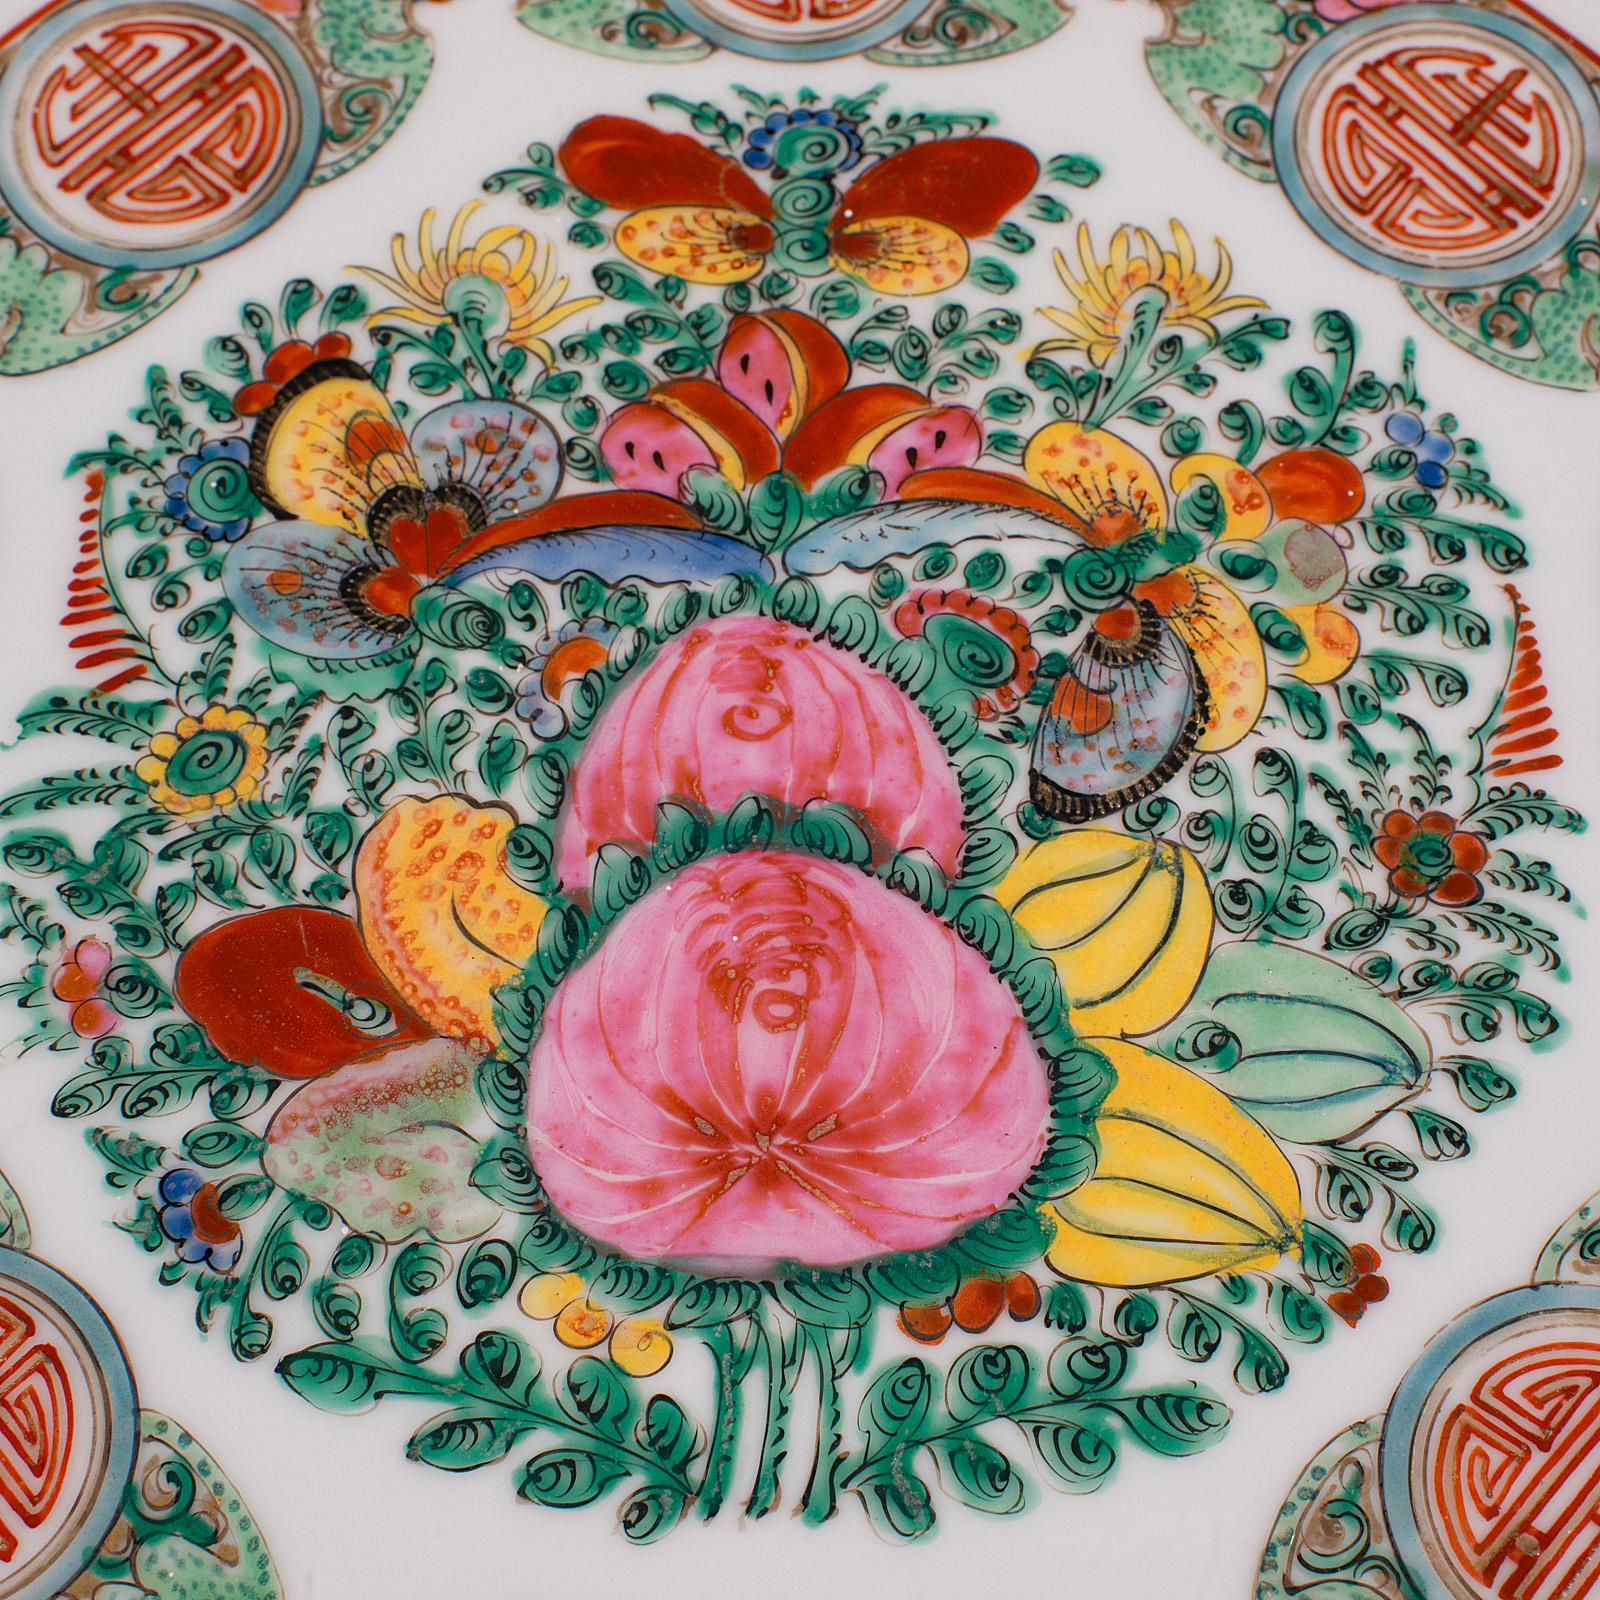 Antique Celebration Plate, Chinese, Ceramic, Decorative Charger, Victorian, Qing For Sale 2